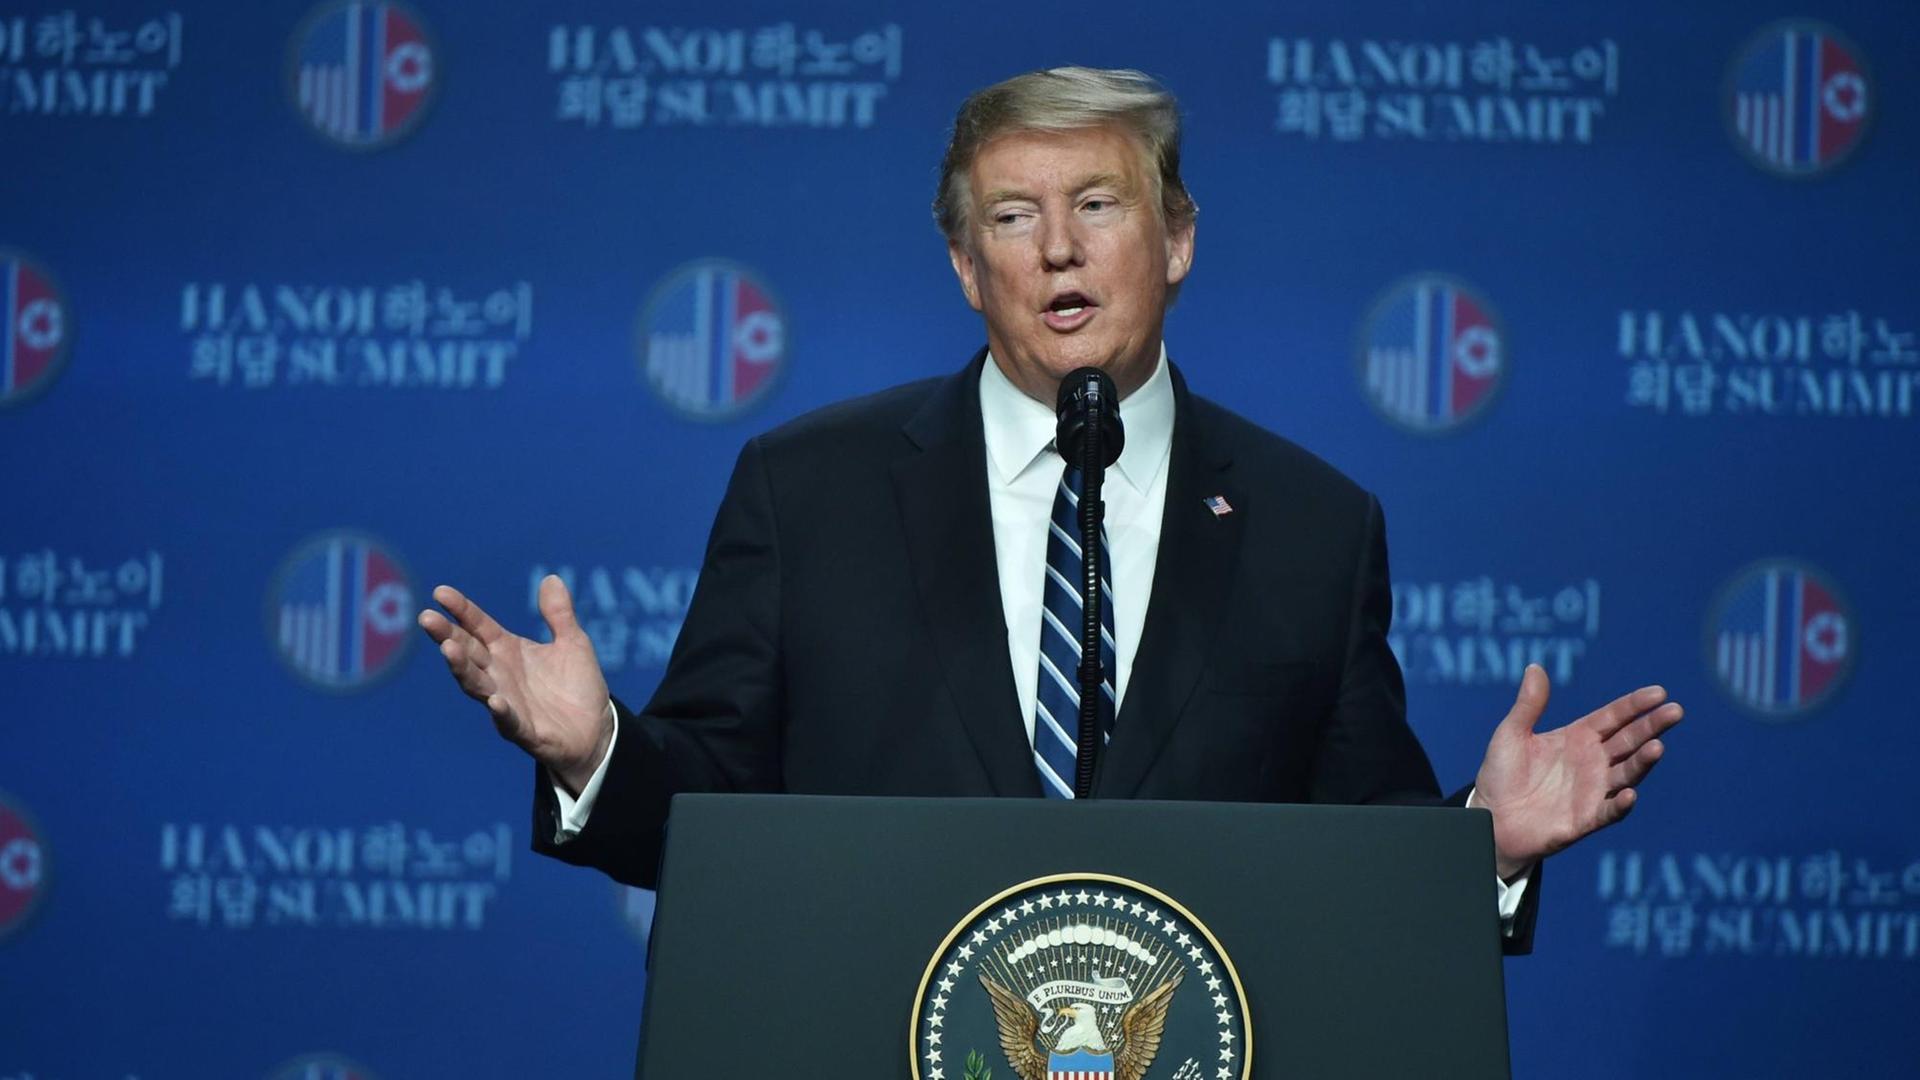 (190228) -- HANOI, Feb. 28, 2019 (Xinhua) -- U.S. President Donald Trump speaks at a press conference in Hanoi, Vietnam, Feb. 28, 2019. A gap remained between what the Democratic People s Republic of Korea (DPRK) wanted and what the U.S. wanted, Donald Trump told the press conference, explaining the earlier-than-scheduled end to his second summit with DPRK top leader Kim Jong Un. (Xinhua/Wang Shen) VIETNAM-HANOI-TRUMP-PRESS CONFERENCE PUBLICATIONxNOTxINxCHN